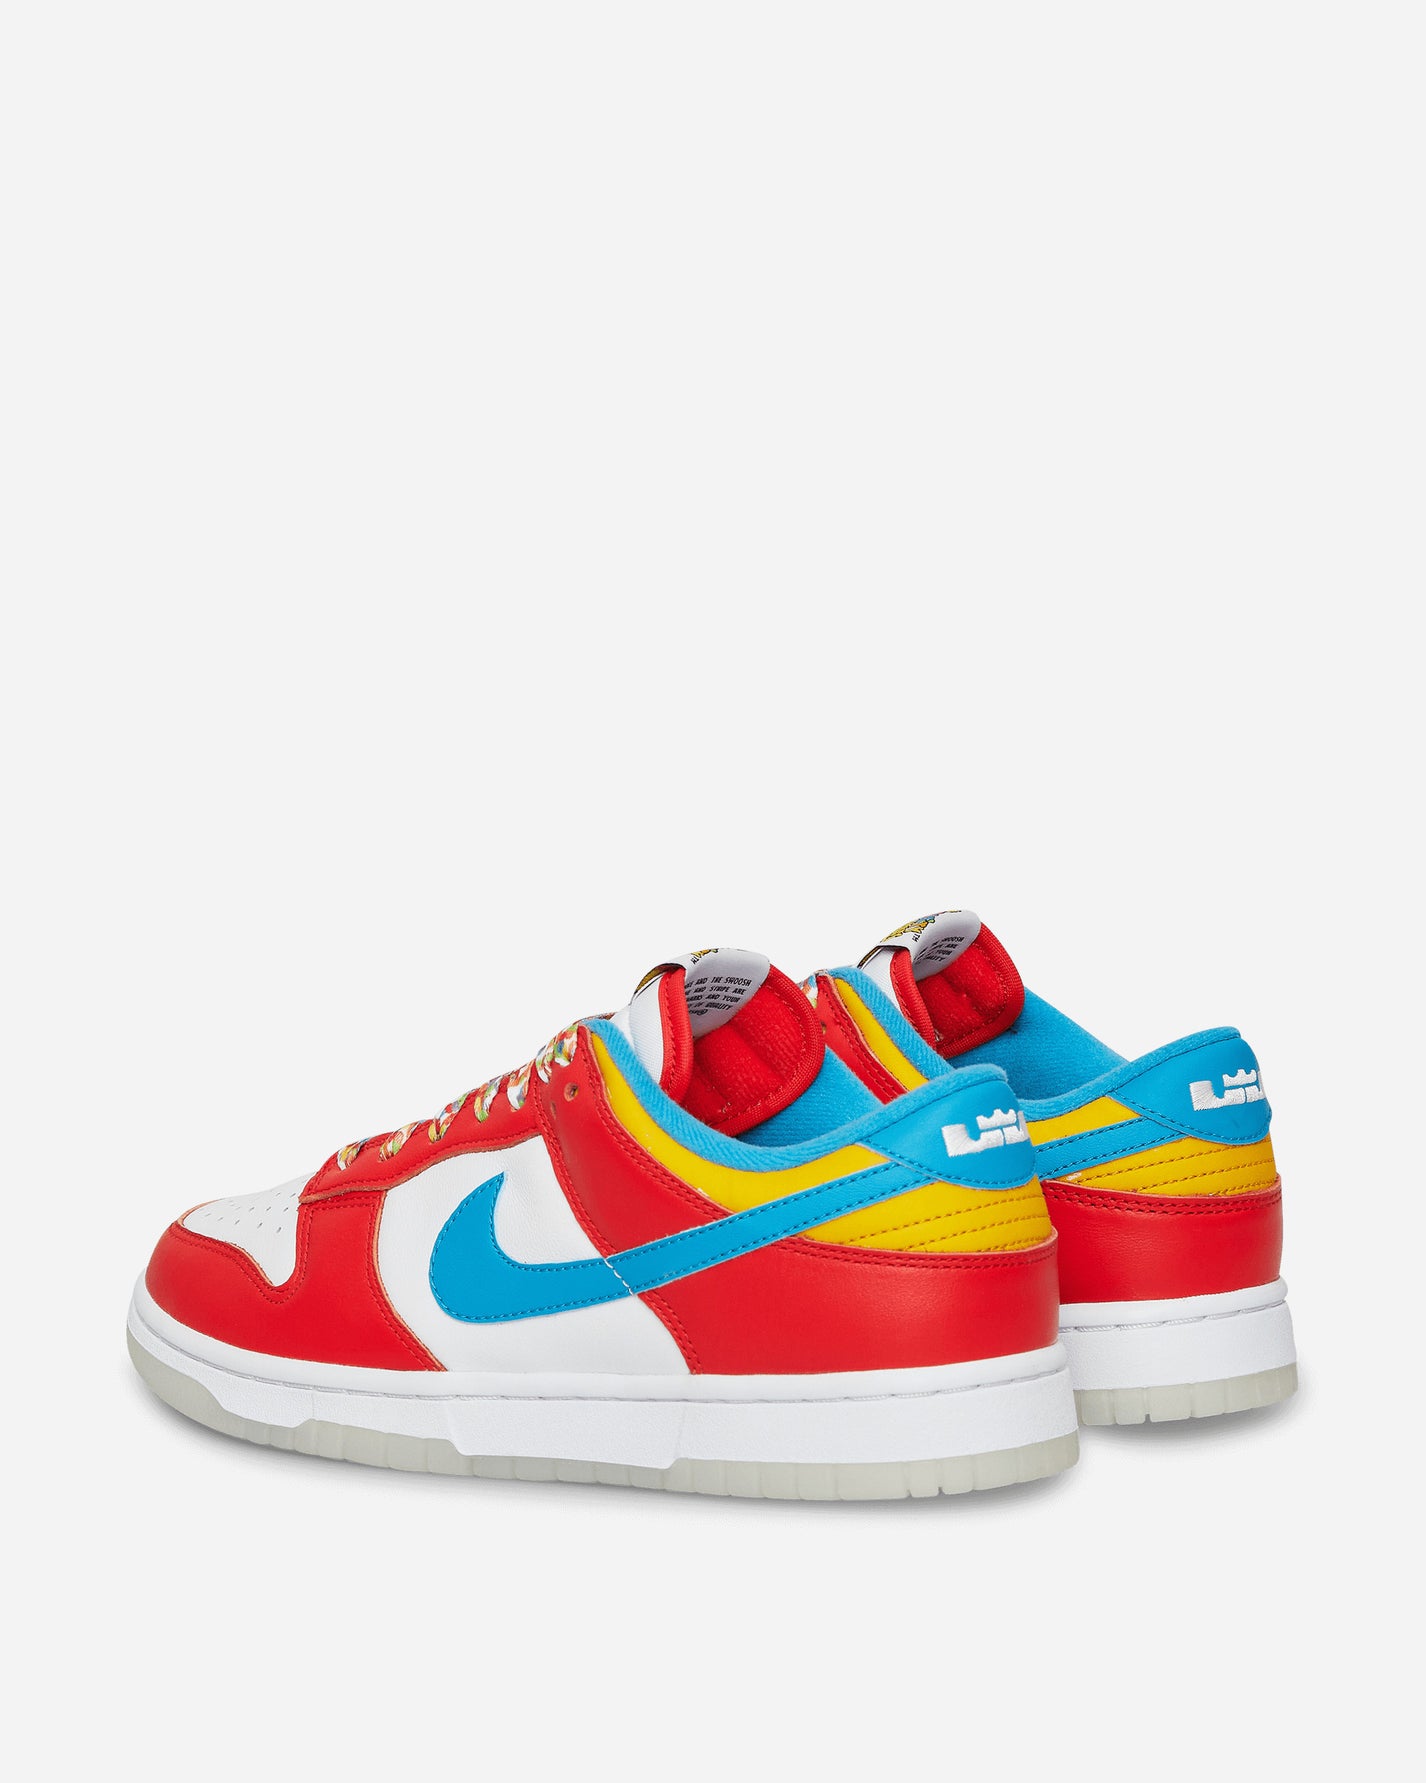 Nike Dunk Loqs Habanero Red/Laser Blue-White Sneakers Low DH8009-600